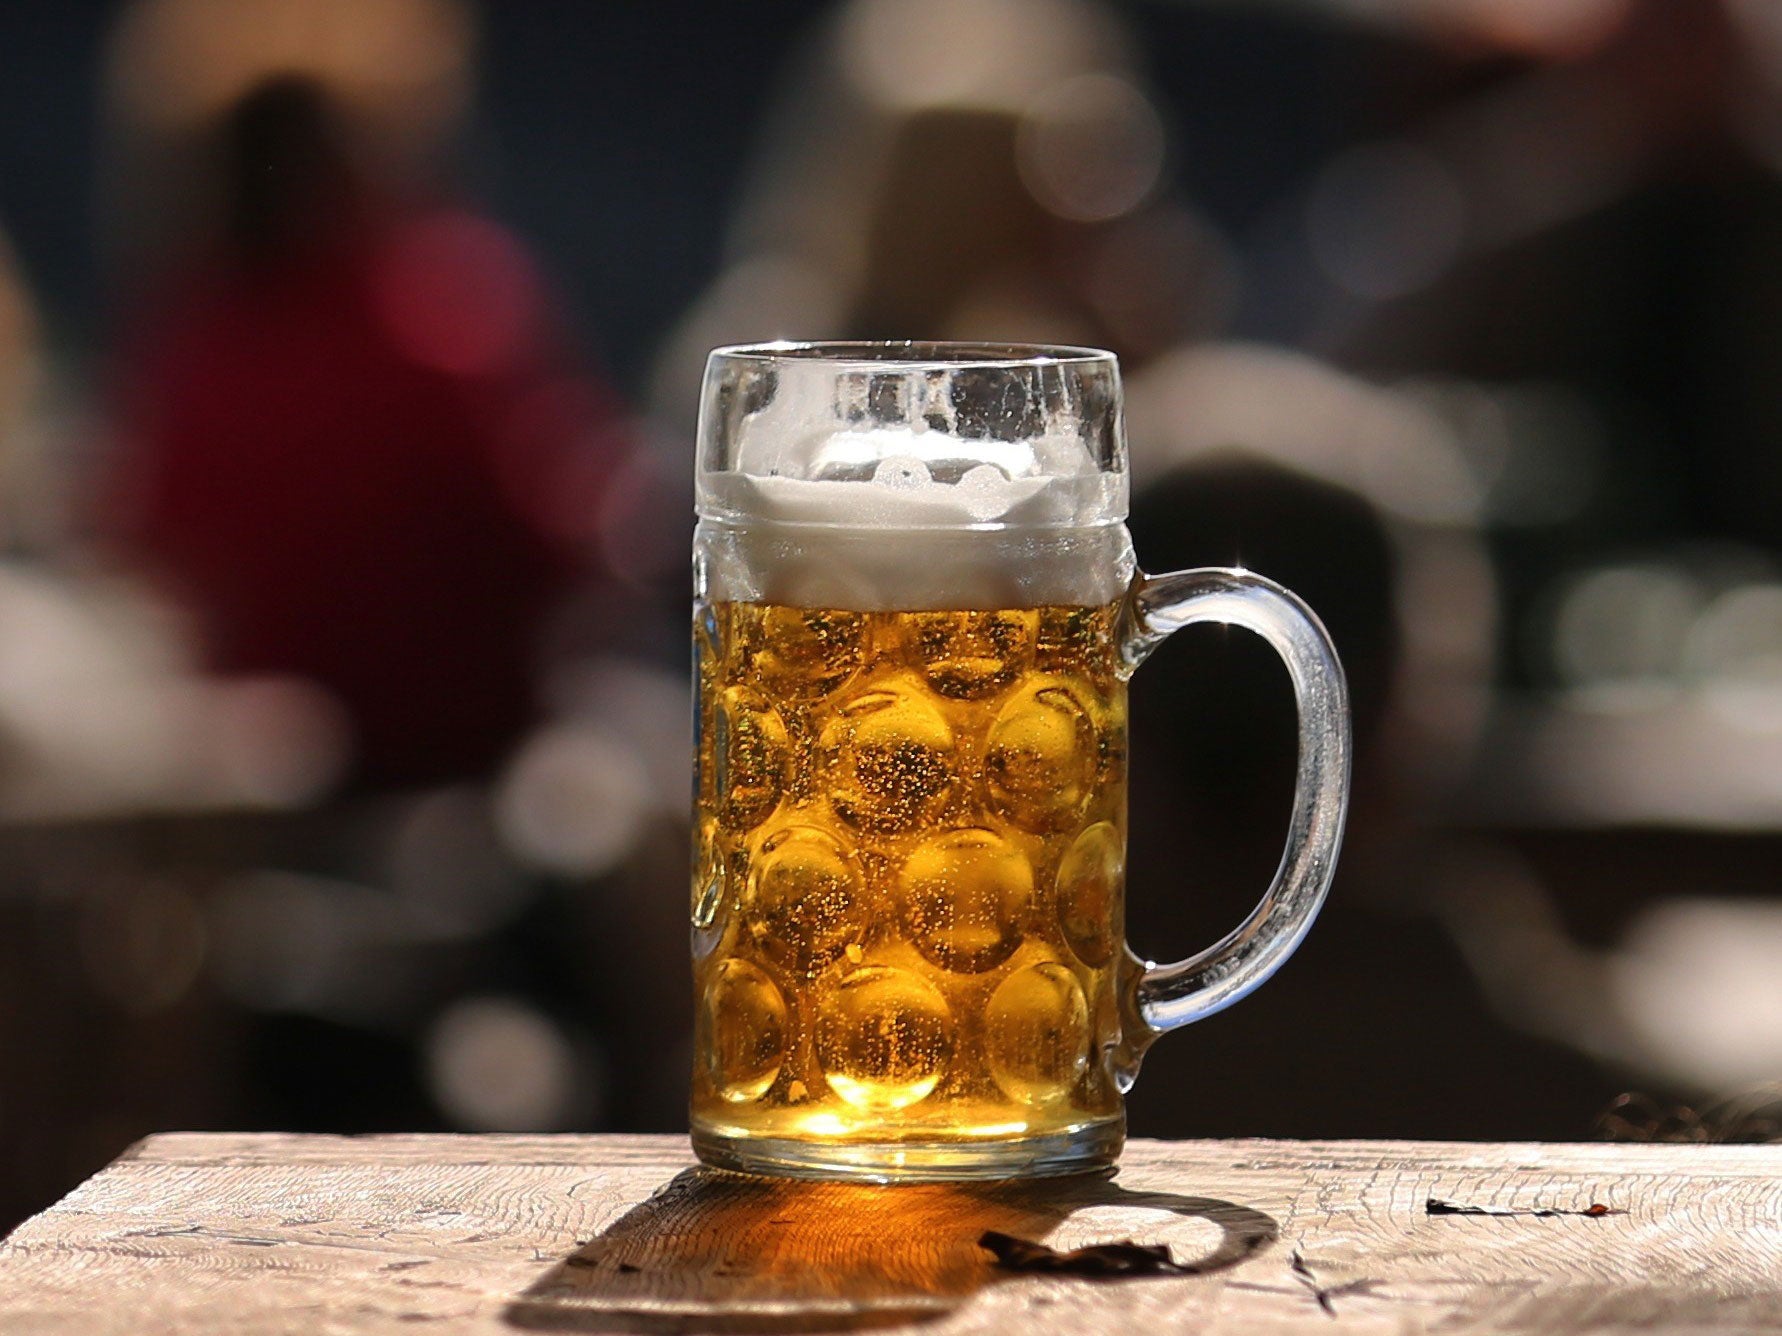 Probiotics and B vitamins in beer can make you feel 'less sluggish' during sex